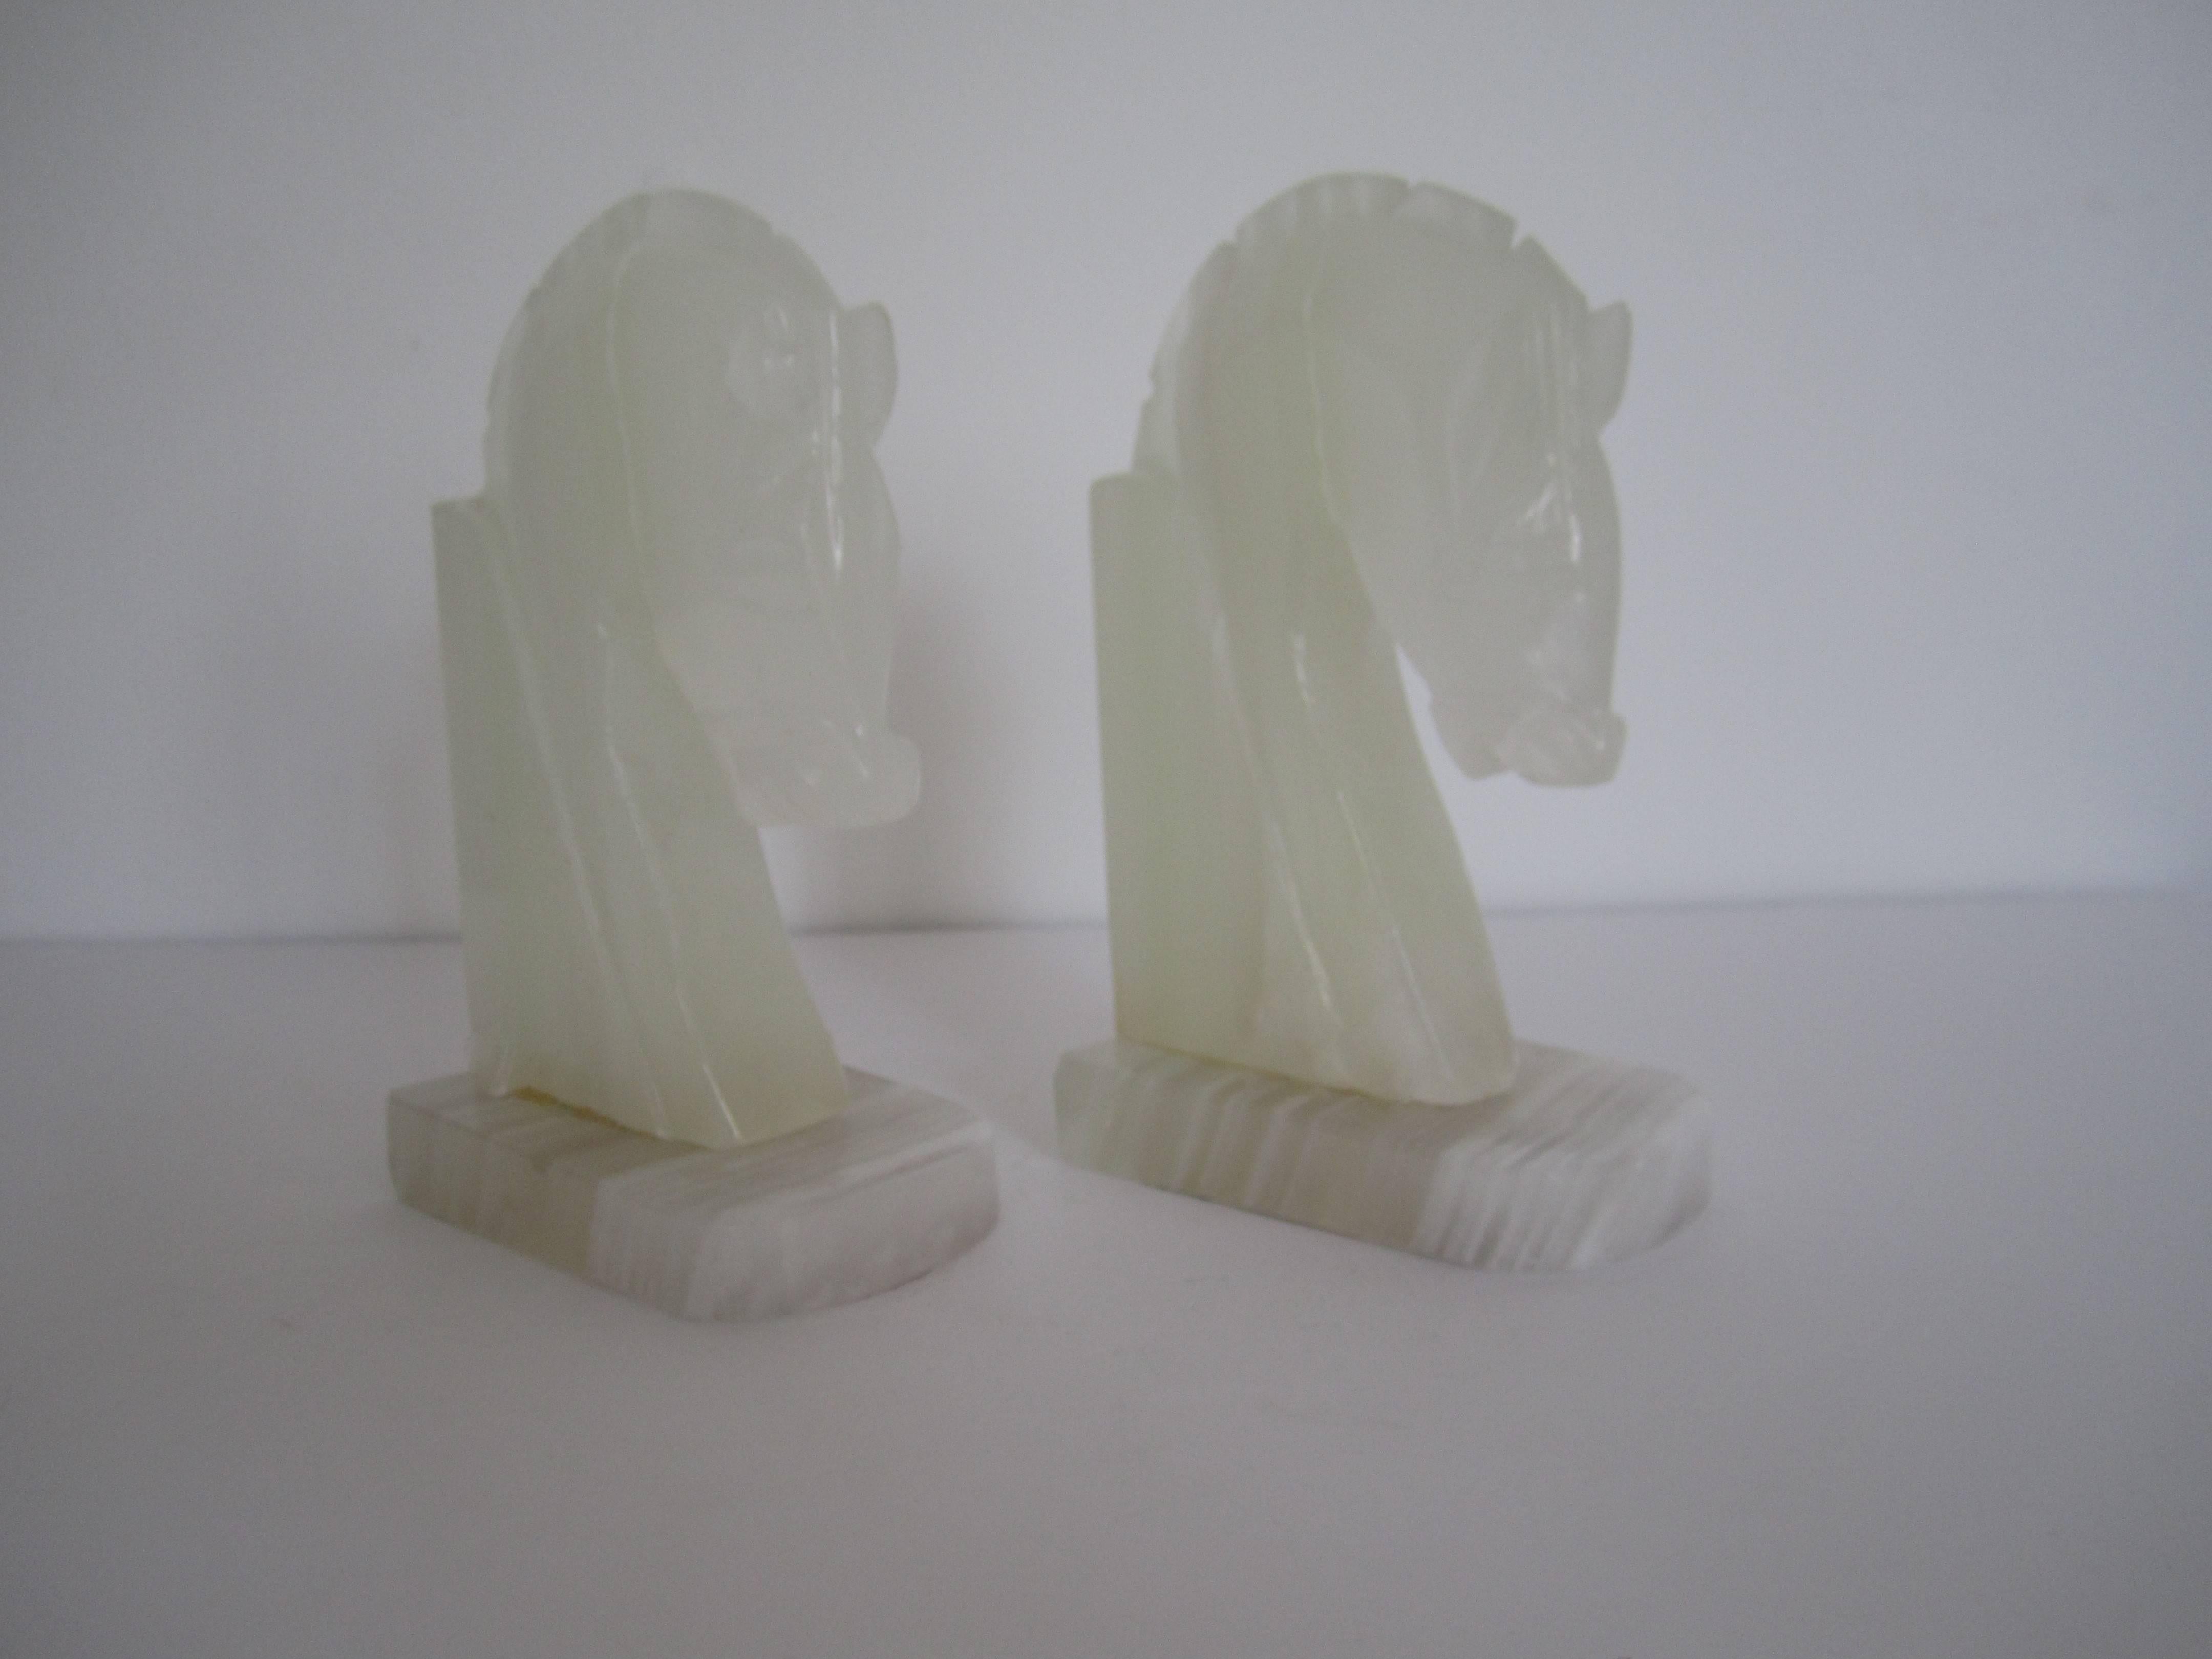 A vintage pair carved white onyx 'Horse', 'Trojan', or 'Equestrian' bookends. Pair is of white and translucent white hues of onyx. Circa 1970s. Pair is available here online, and by request, can be made available by appointment to the Trade (in New